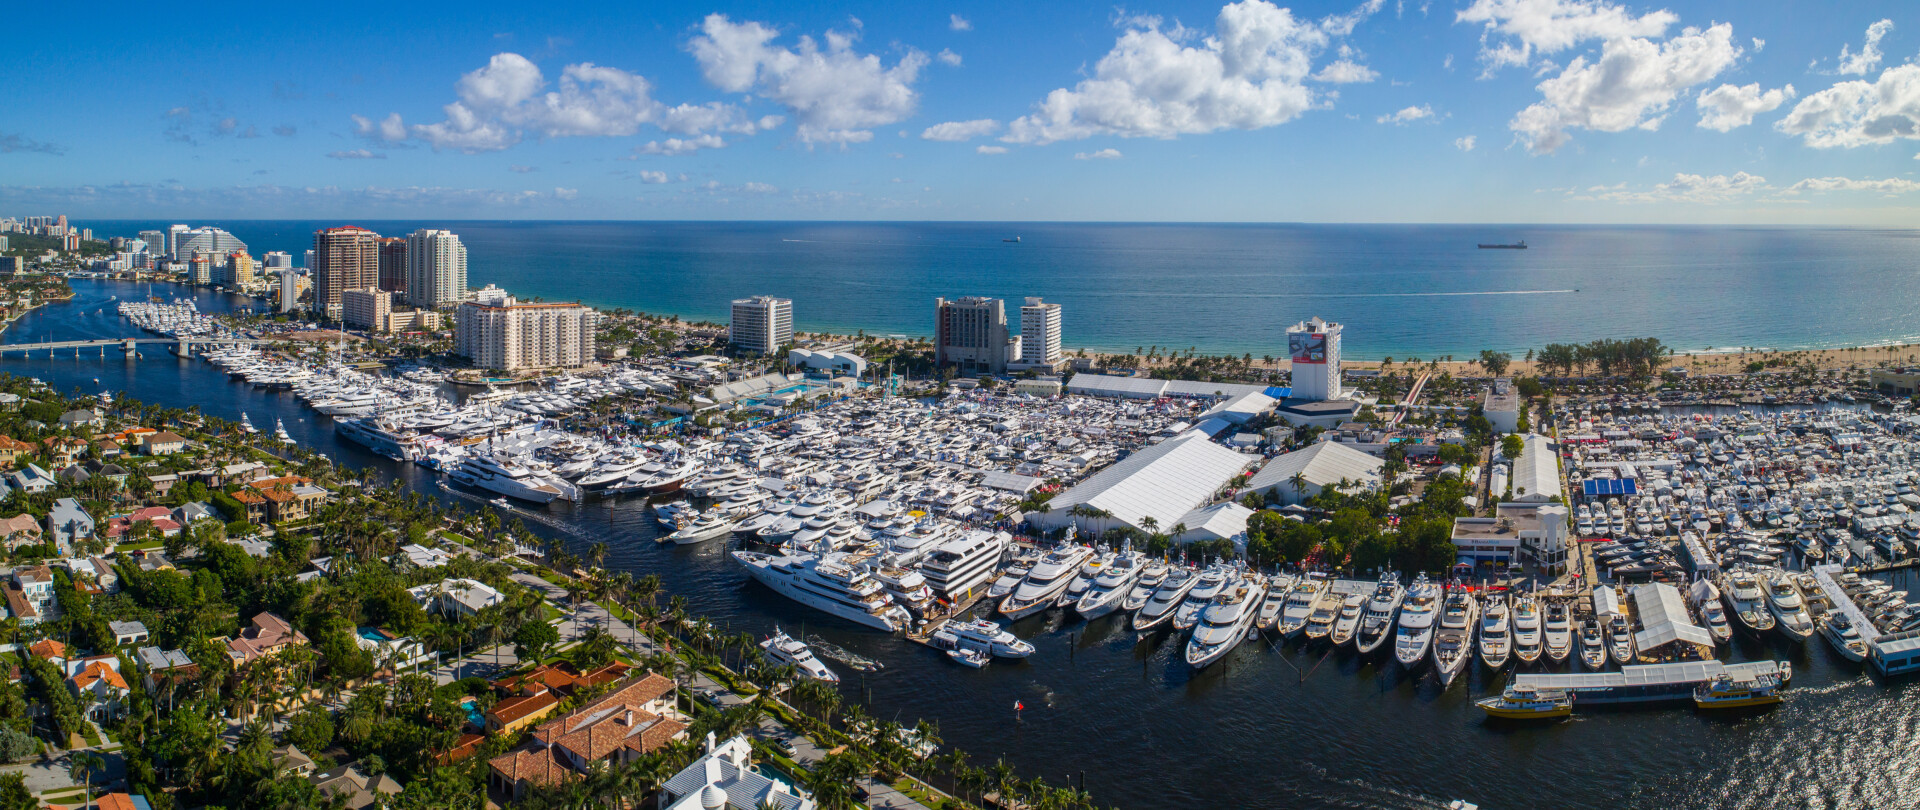 Get the Edmiston VIP experience at the 2022 Fort Lauderdale International Boat Show